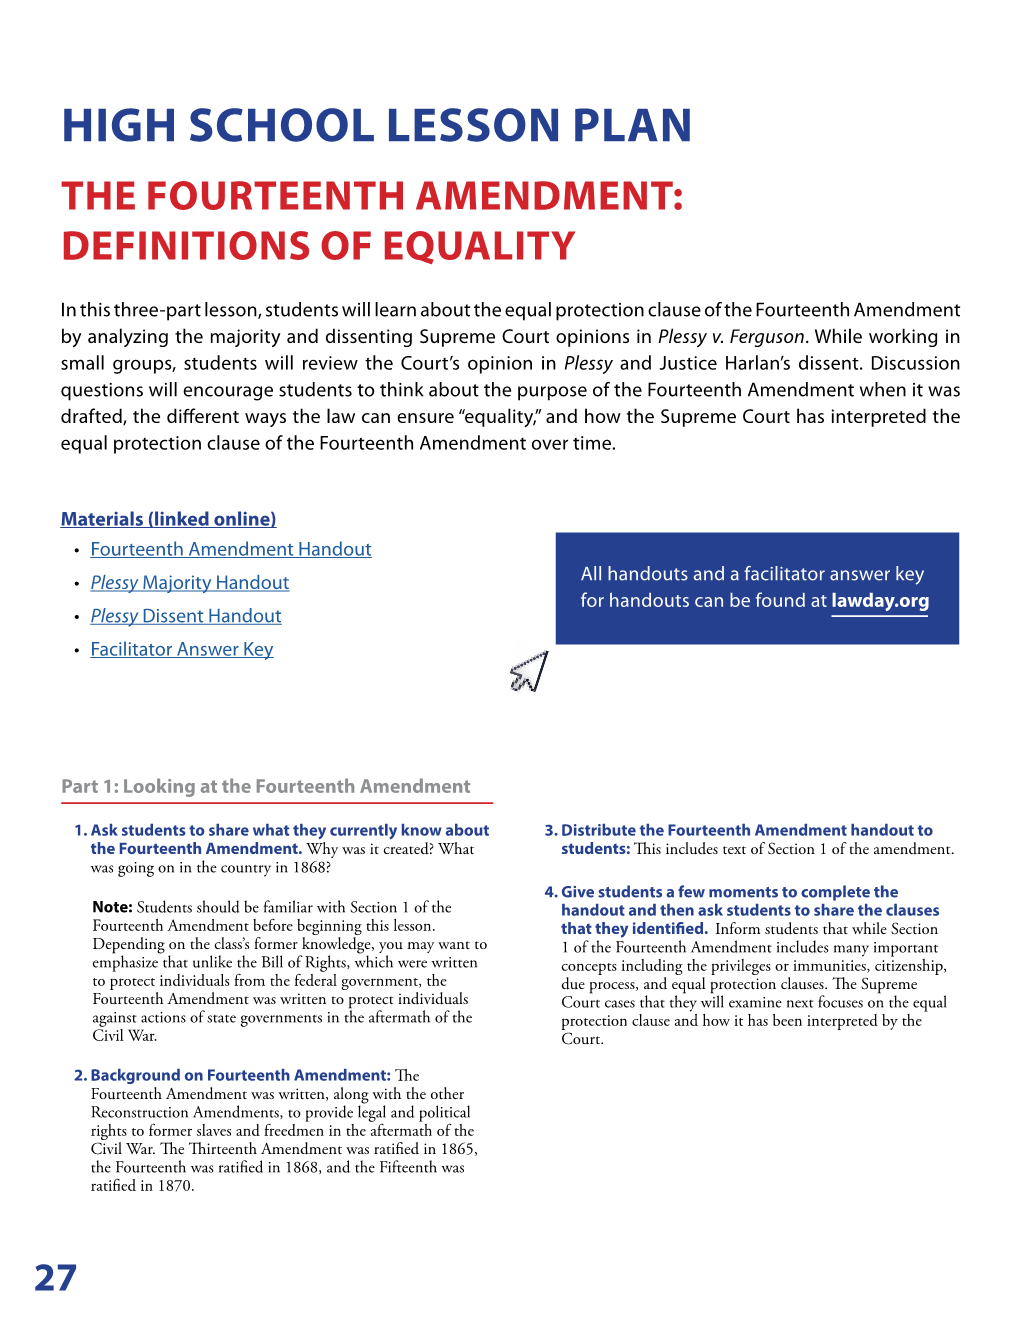 High School Lesson Plan the Fourteenth Amendment: Definitions of Equality